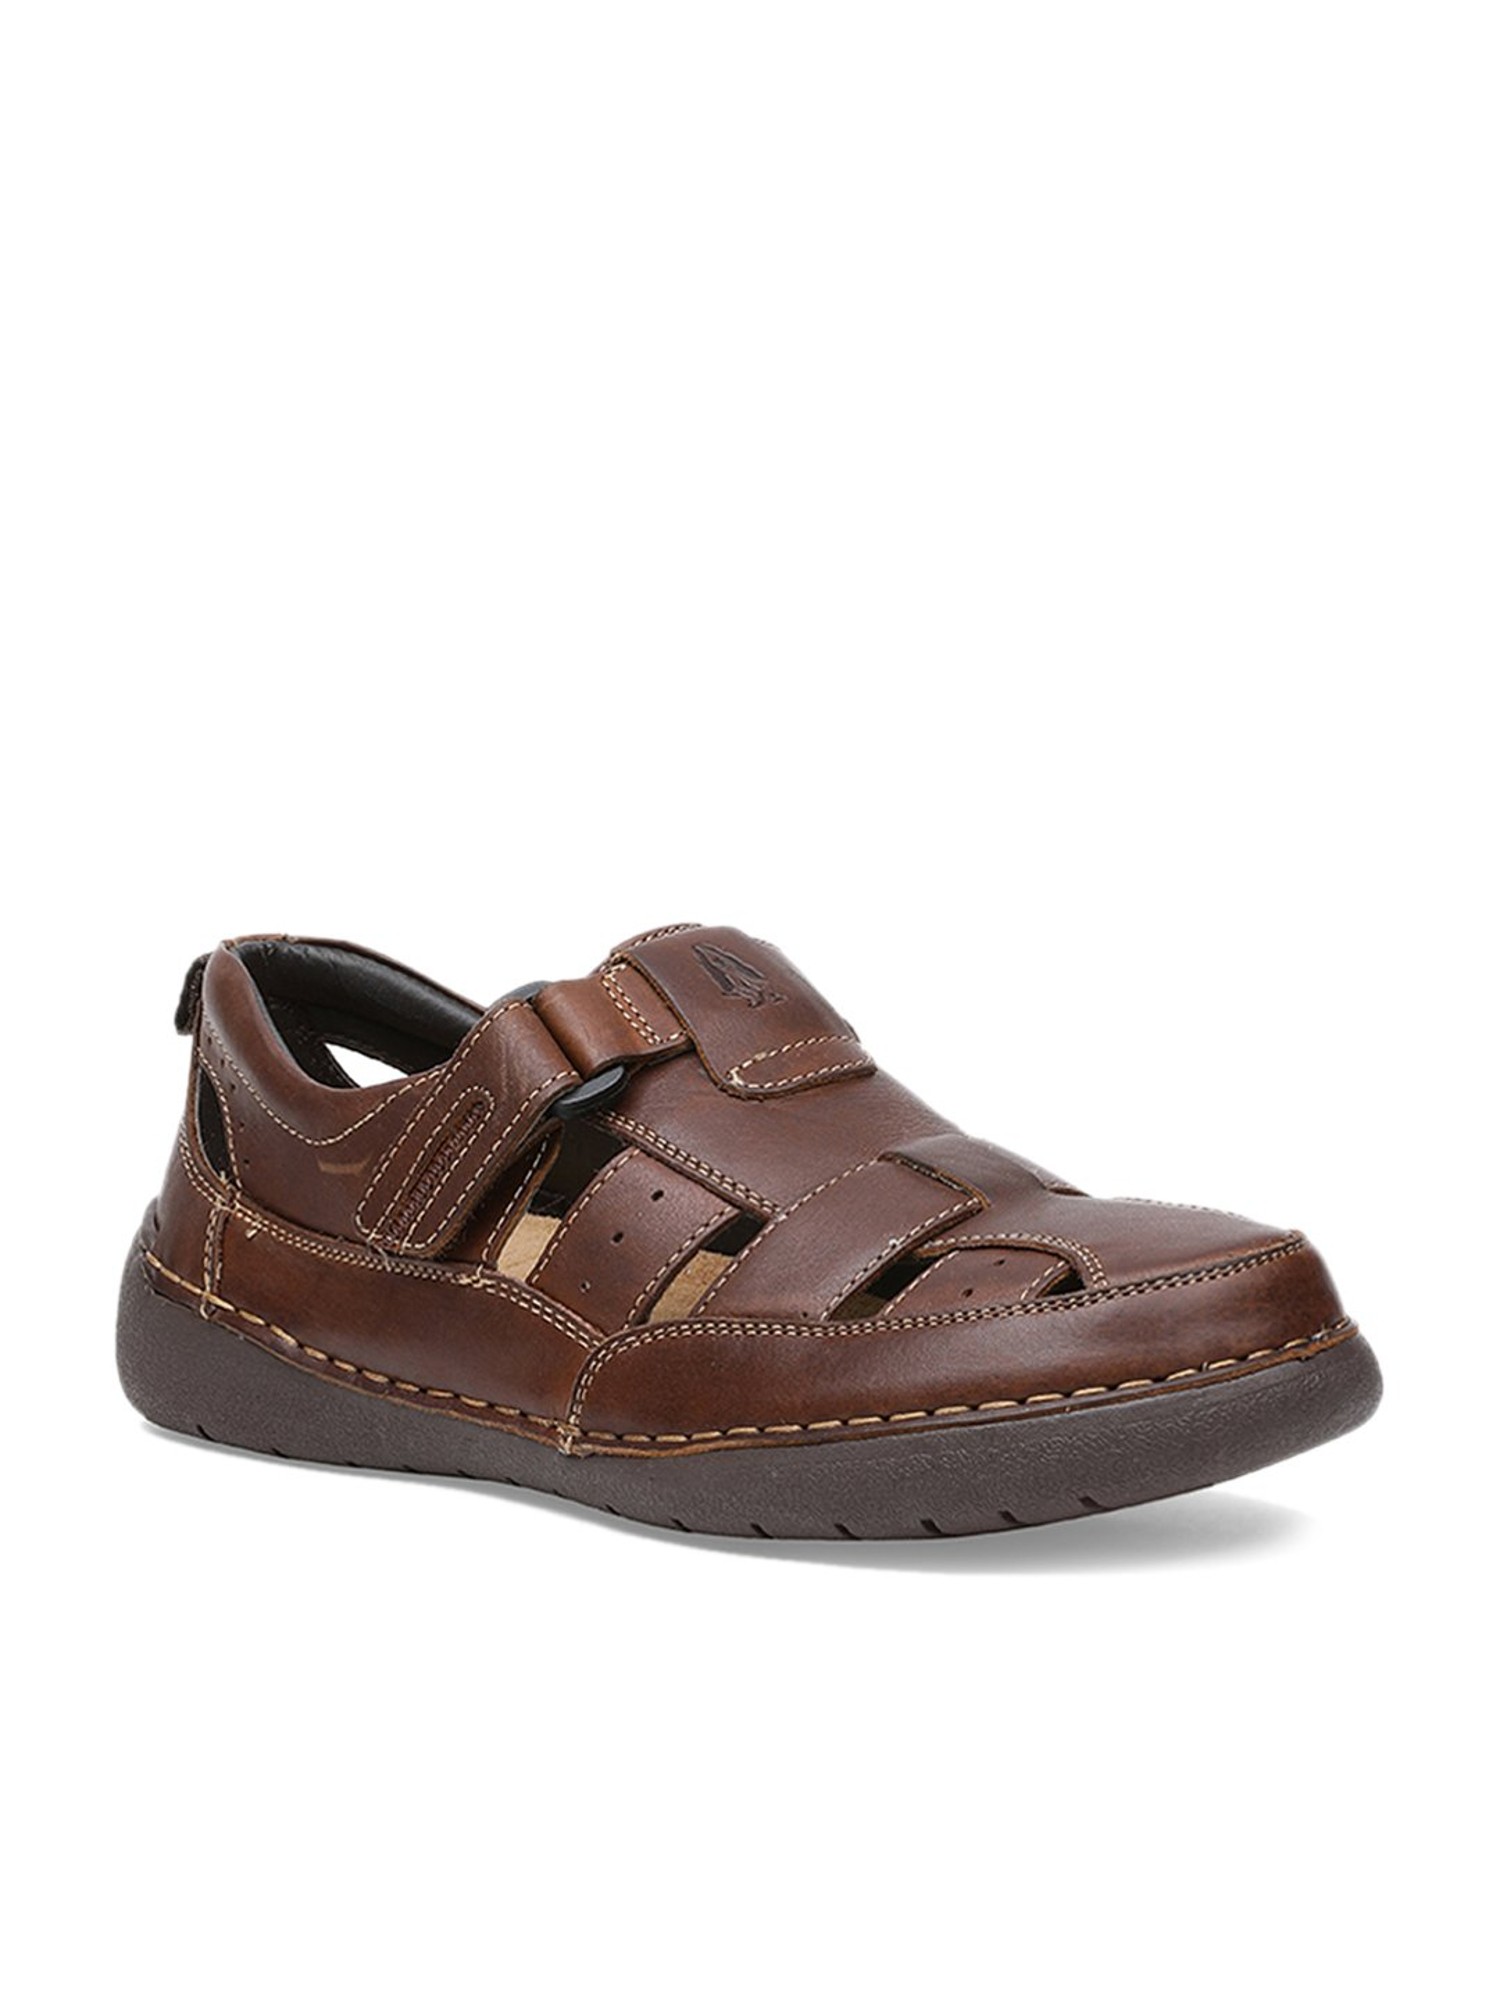 Hush Puppies Womens Sandals India  Hush Puppies Online Sale India